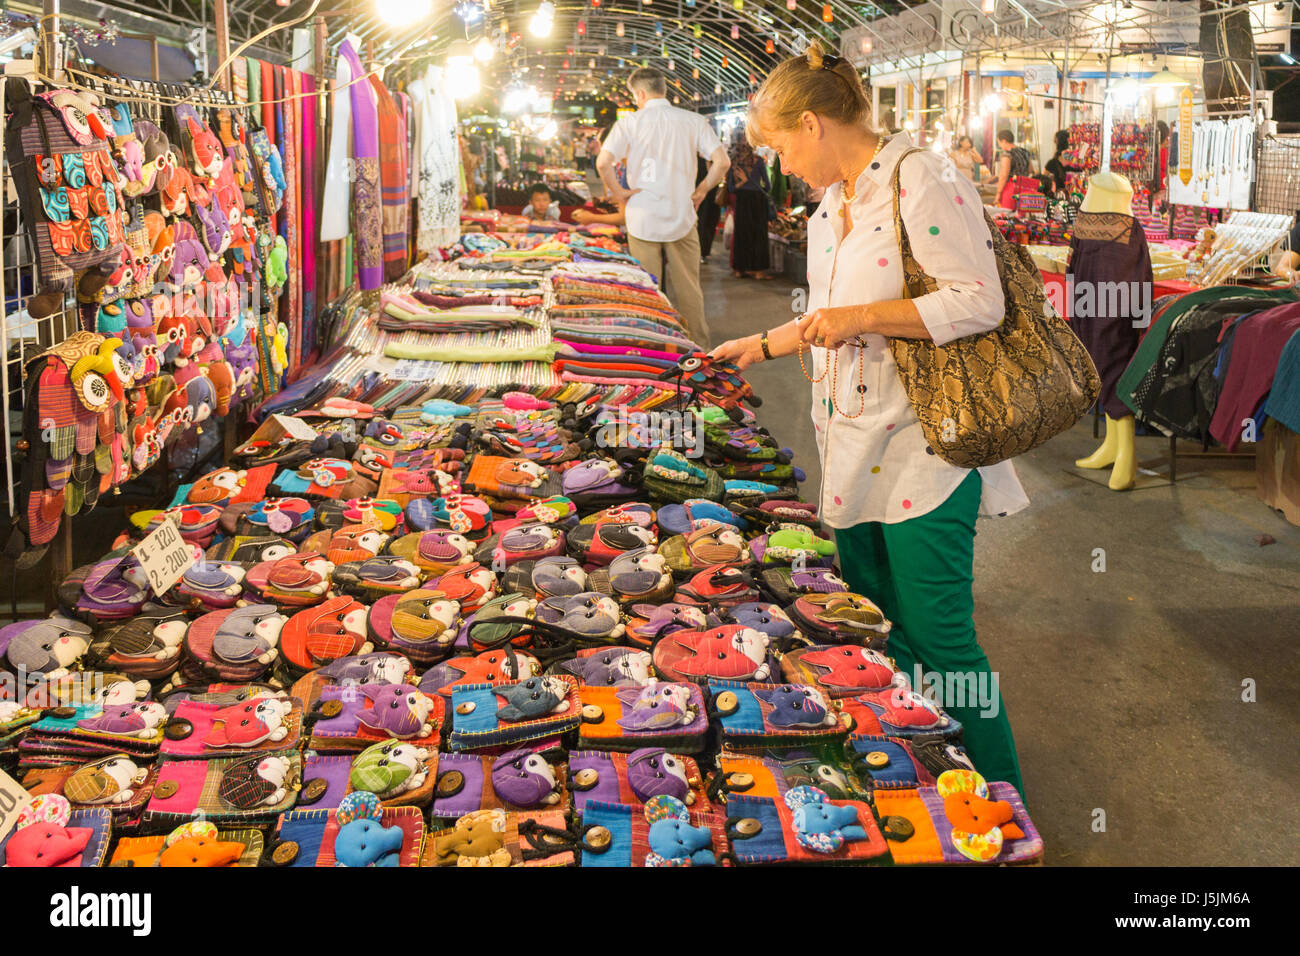 A woman tourist looks at goods on a market stall on Mae Hong Son night market, Thailand Stock Photo